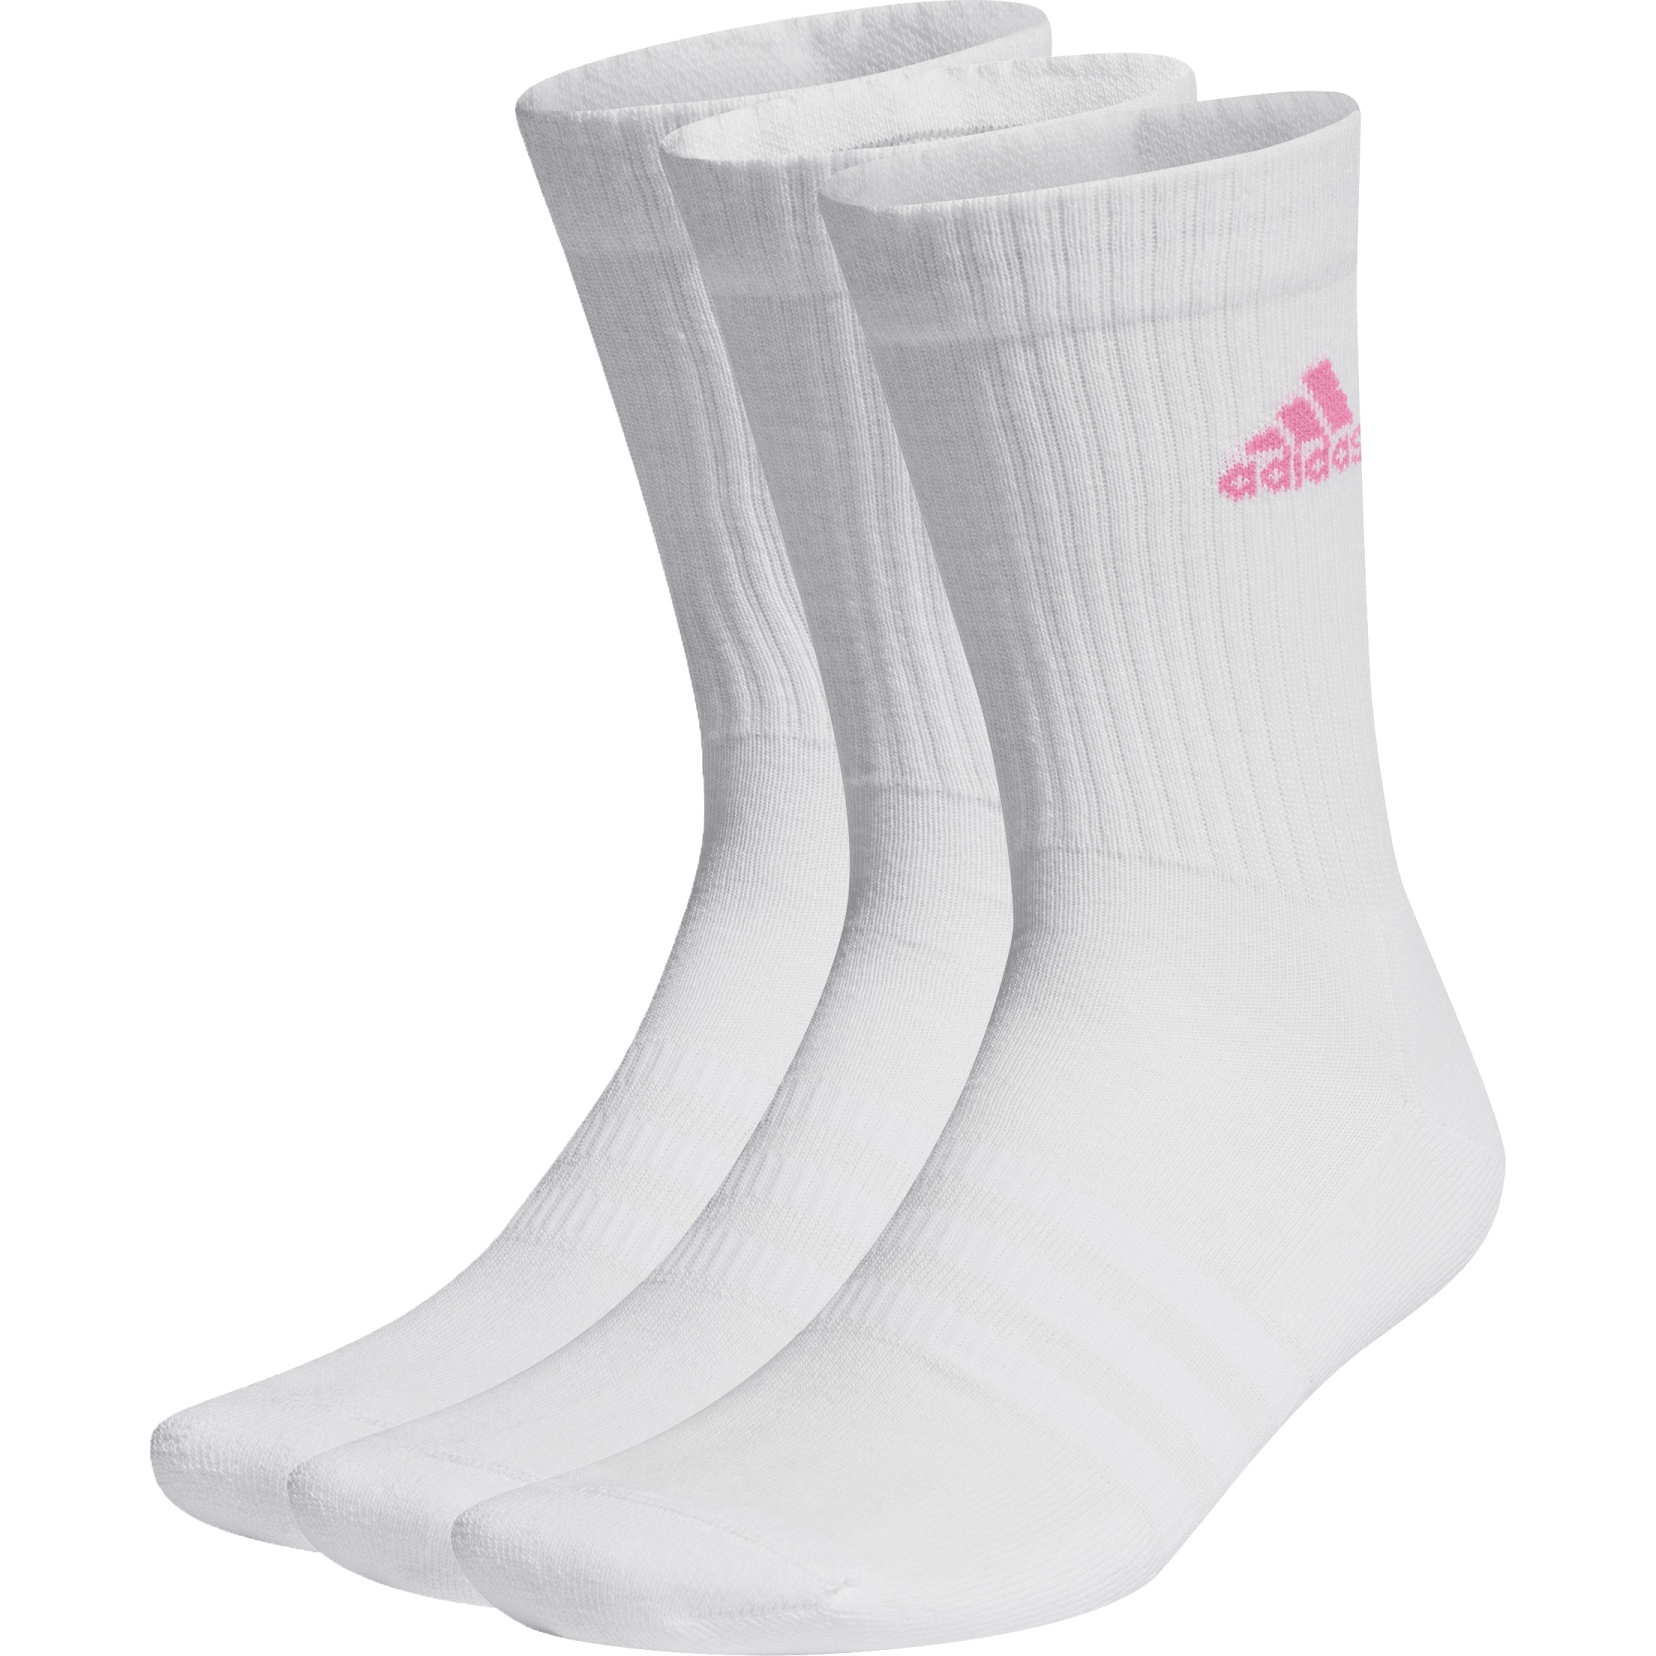 Picture of adidas Cushioned Sportswear Crew Socks - 3 Pair - white/lucid pink/white/spark IP2635